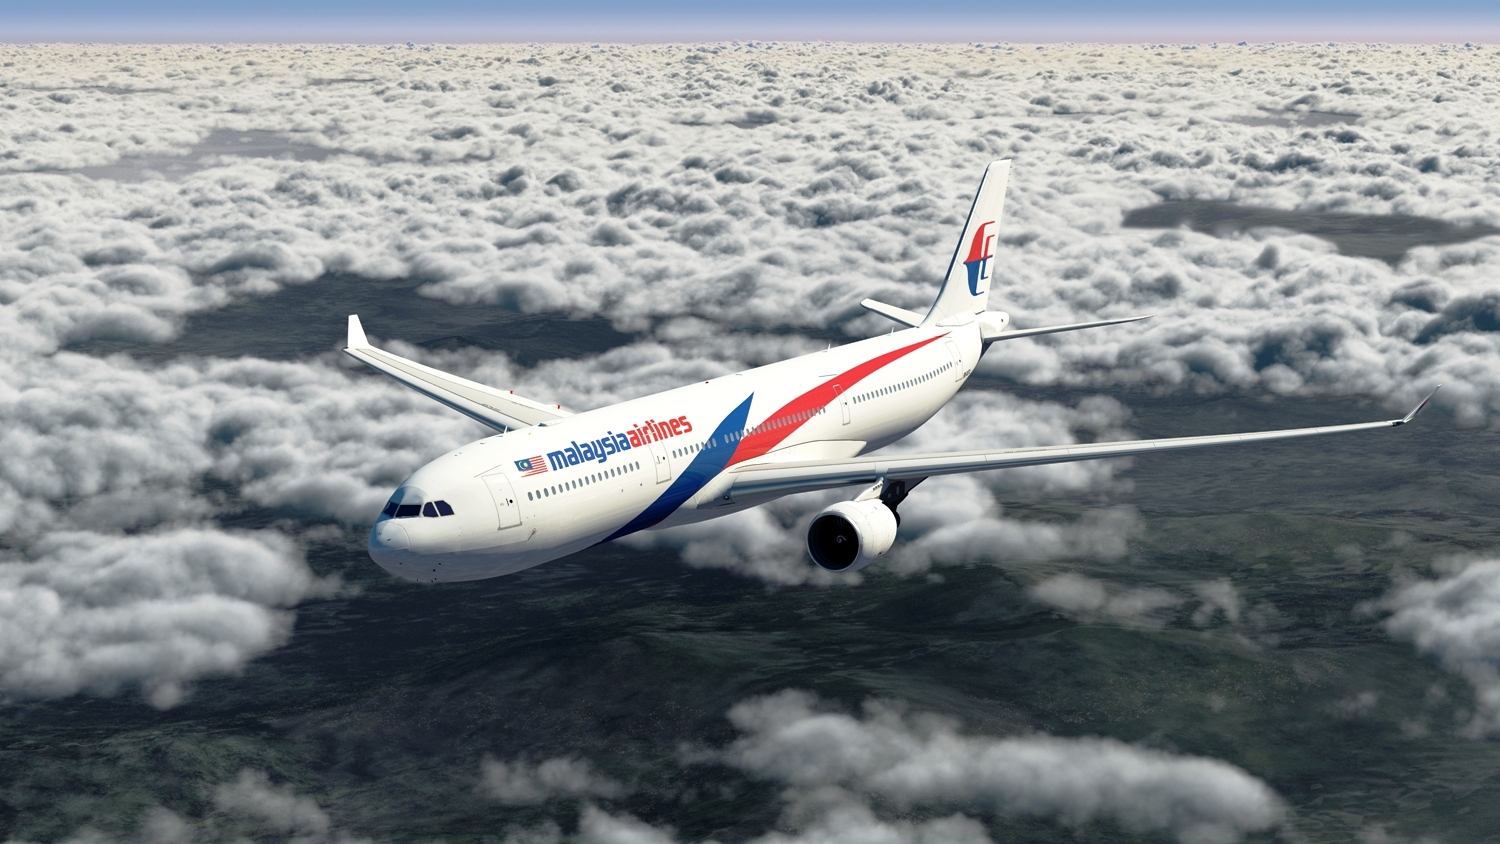 Malaysia Airlines Joins The Oneworld Alliance Network